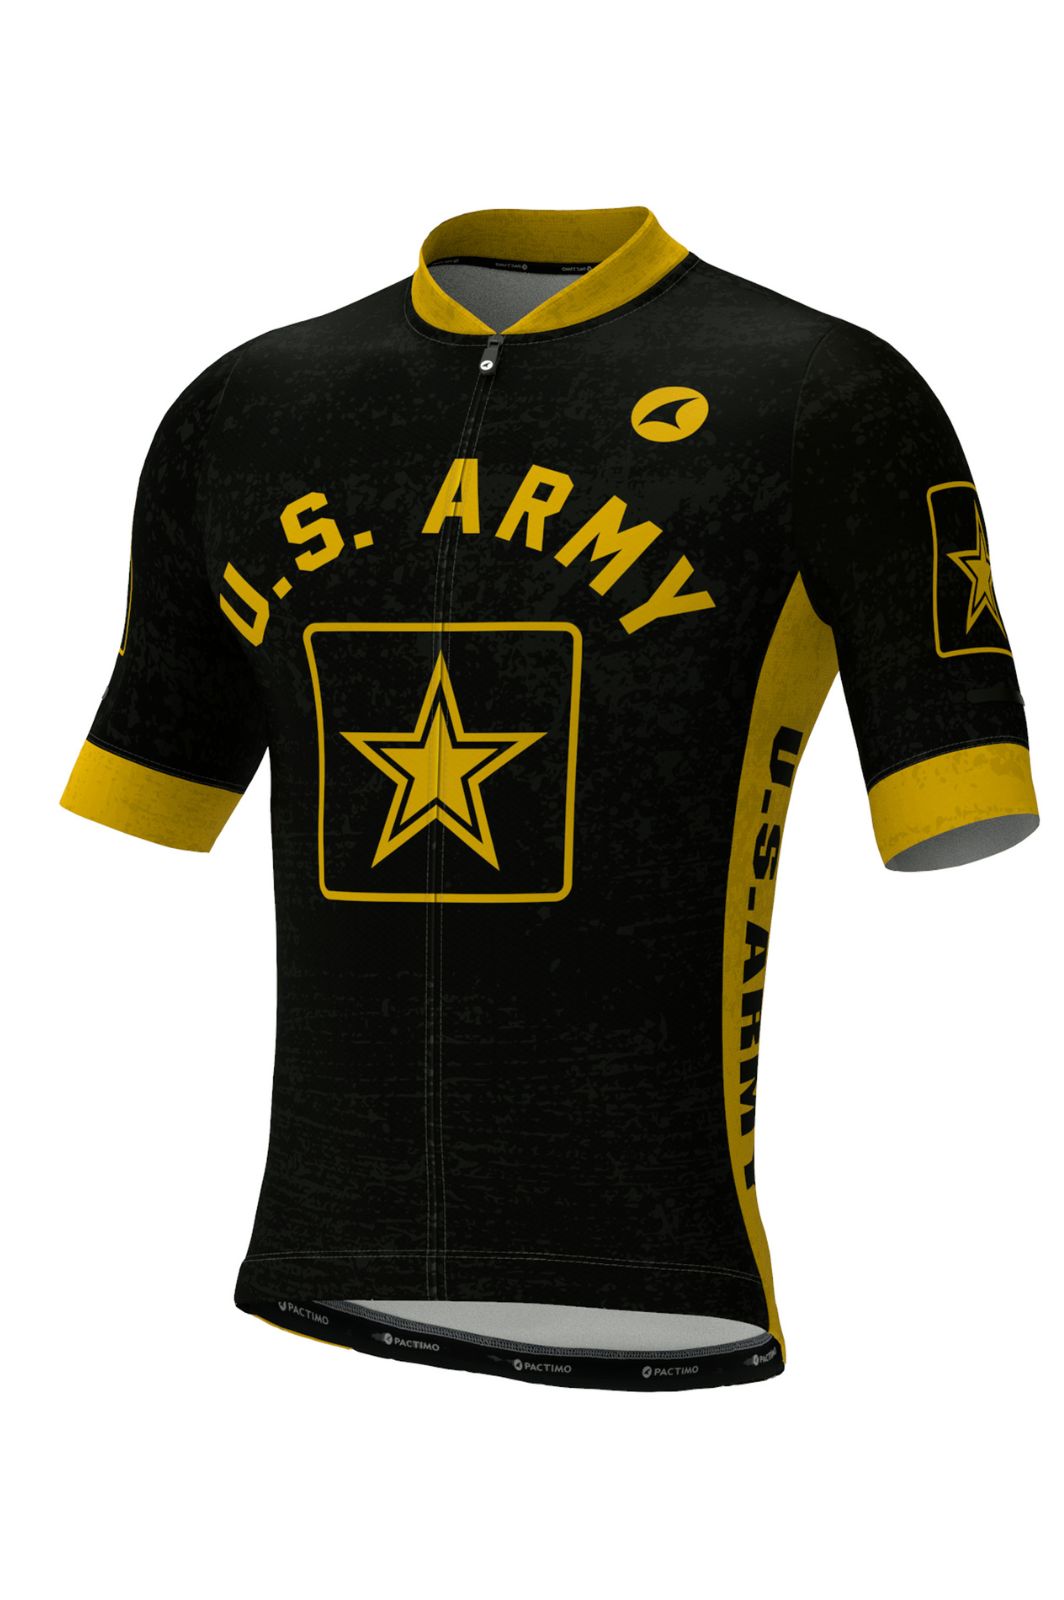 Men's US Army Cycling Jersey - Ascent Aero Front View